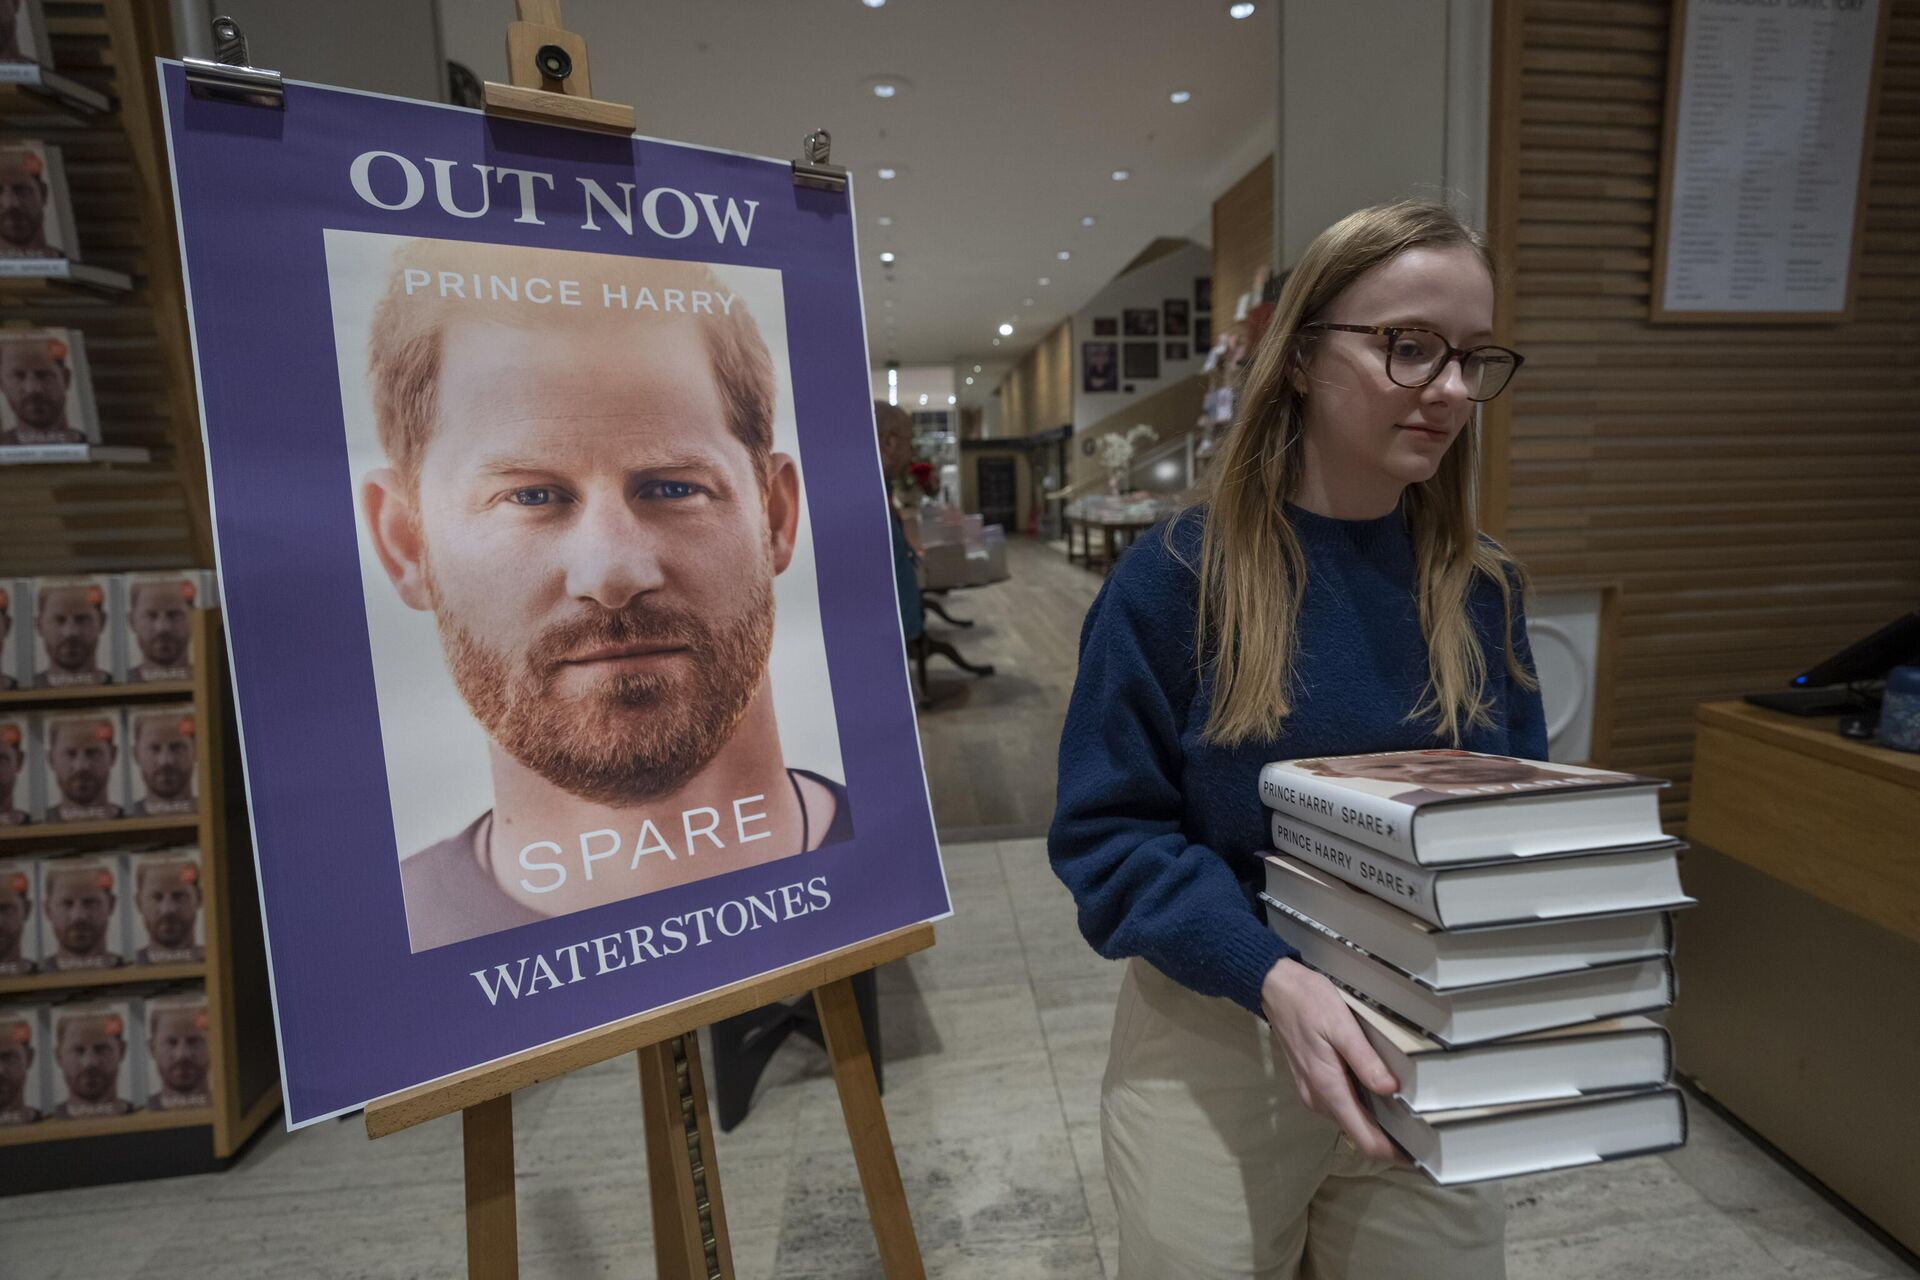 A member of staff places the copies of the new book by Prince Harry called Spare at a book store in London, Tuesday, Jan. 10, 2023. - Sputnik International, 1920, 13.01.2023